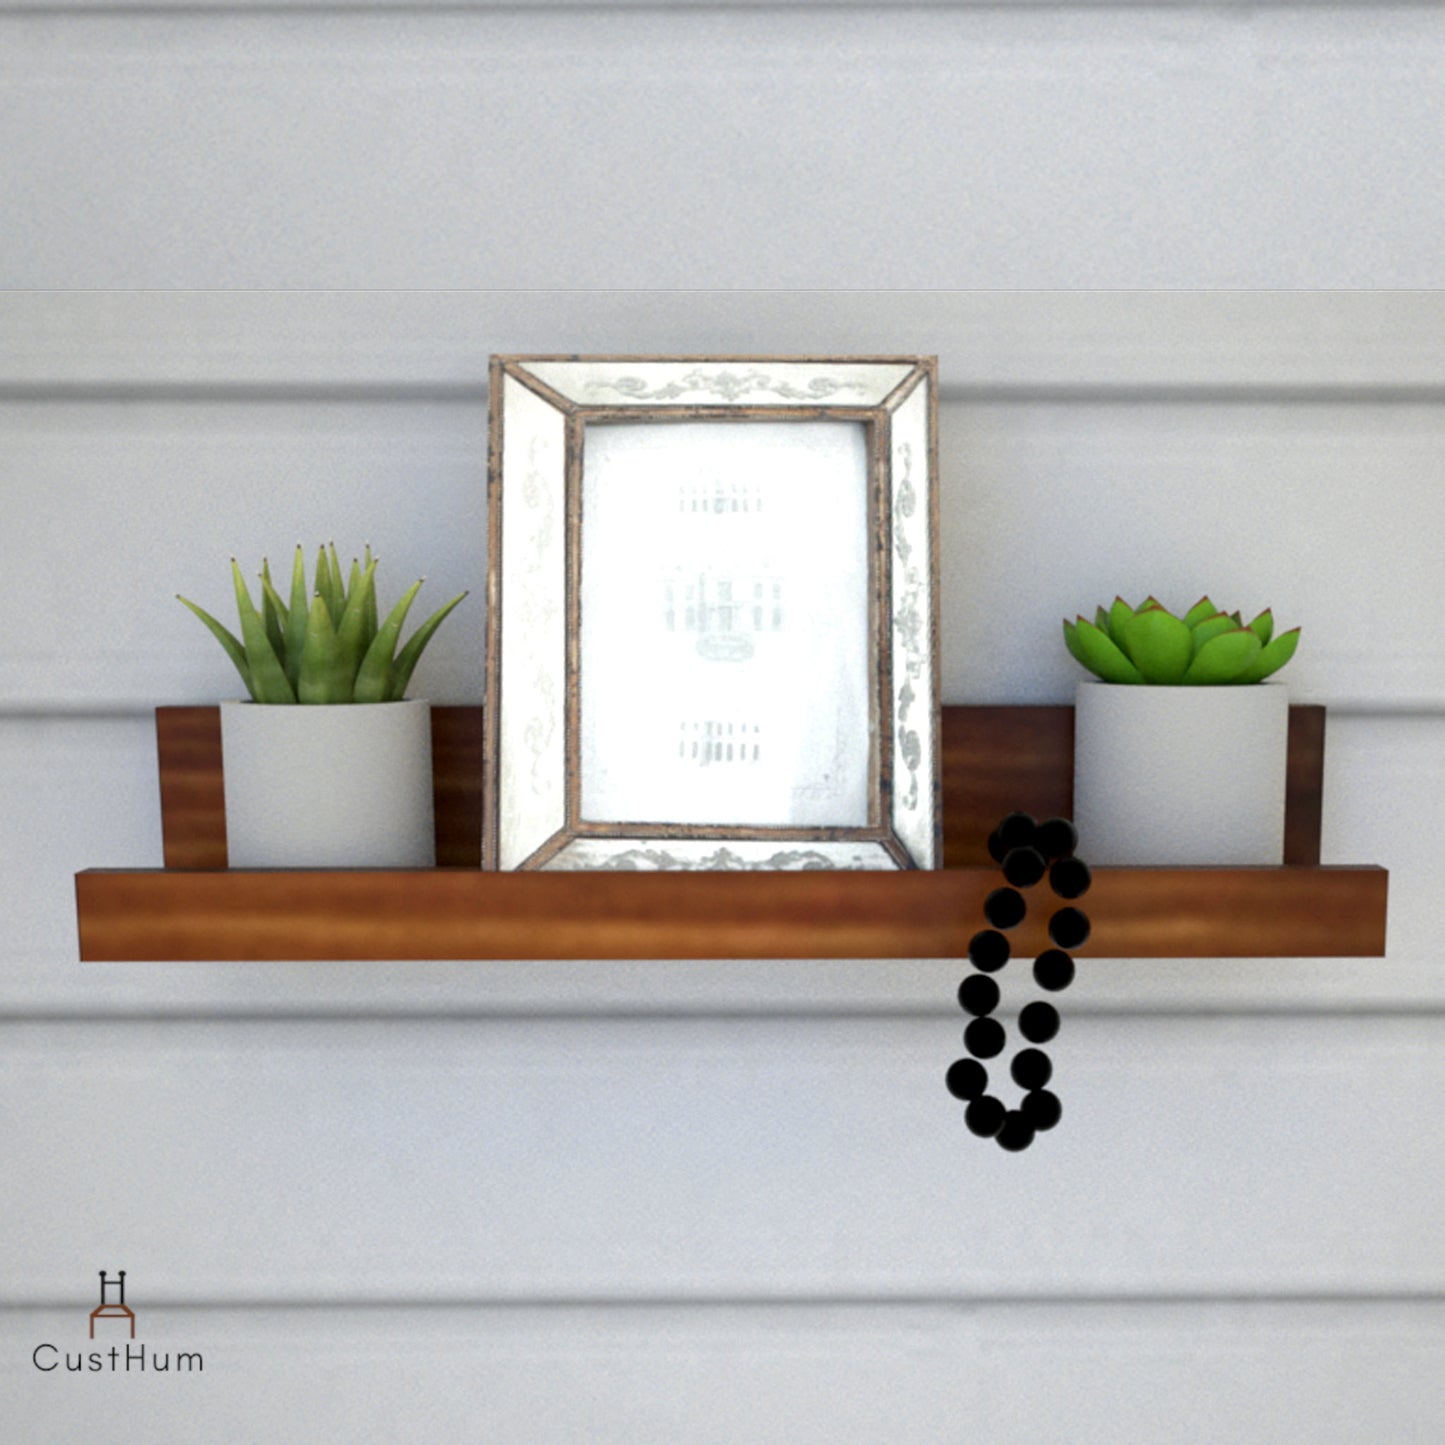 CustHum-Ledge-minimalistic wooden shelf-front view with props-01